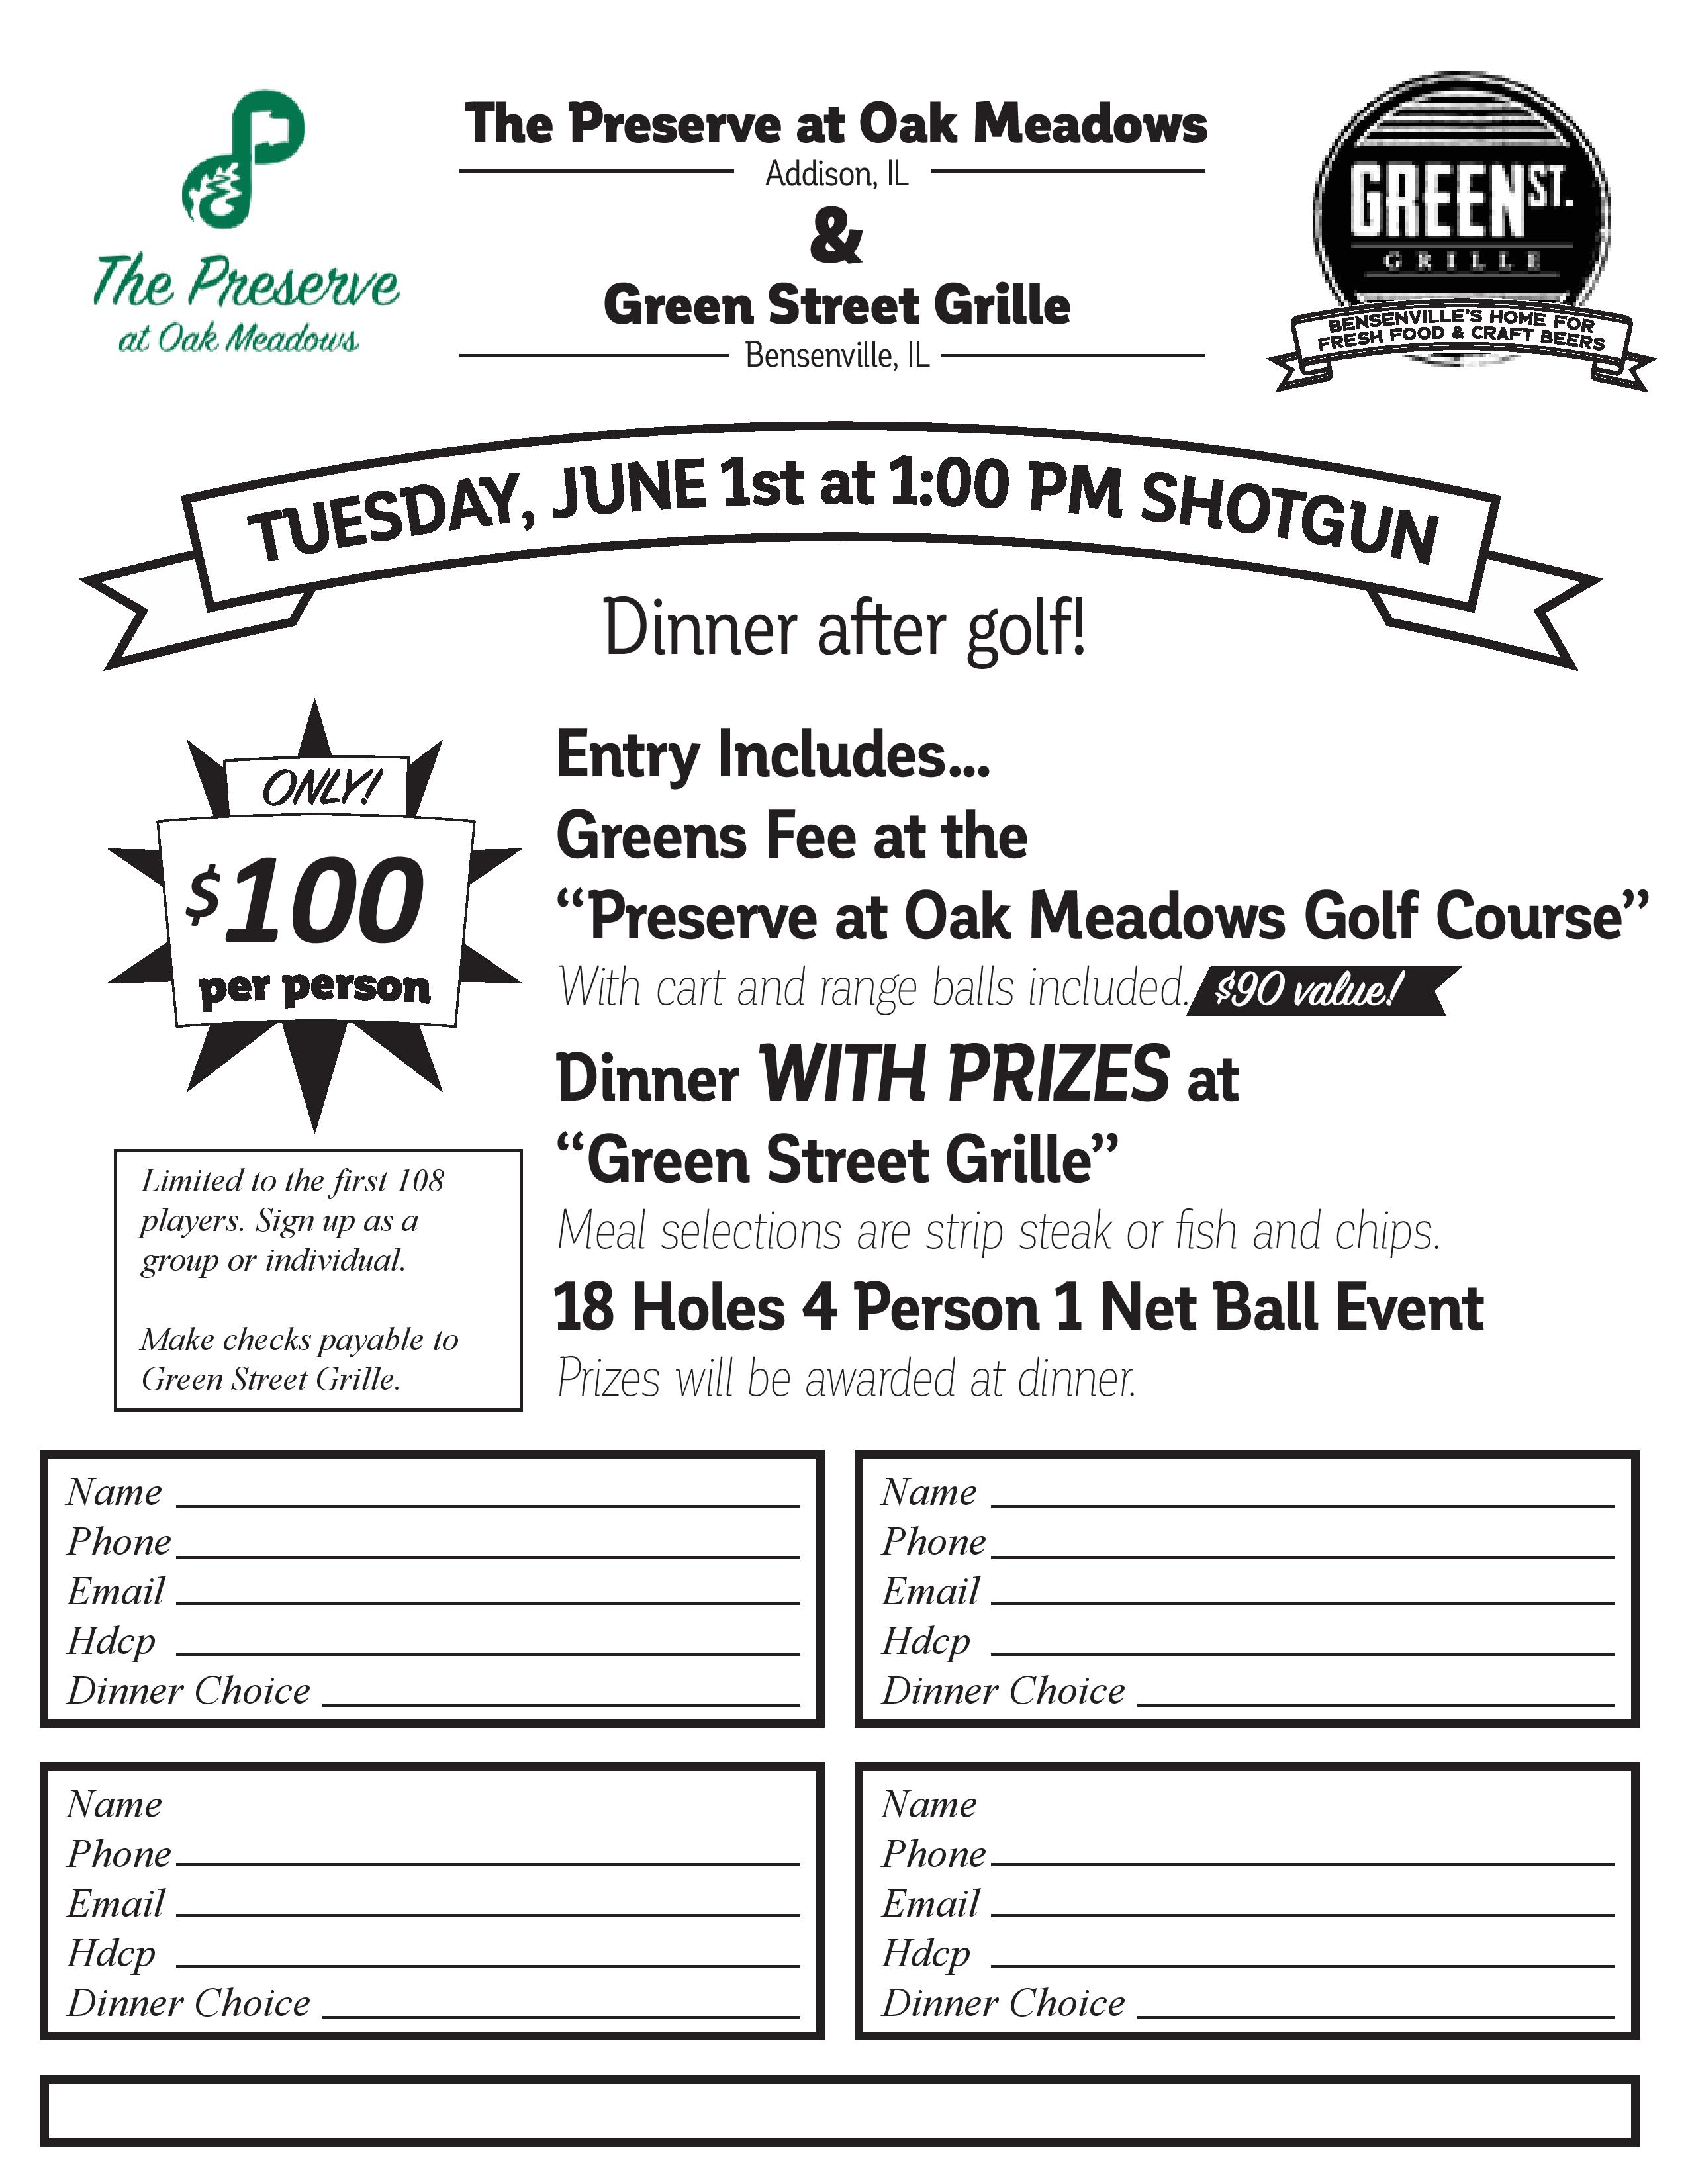 GSG golf outing flyer 2021 page 001